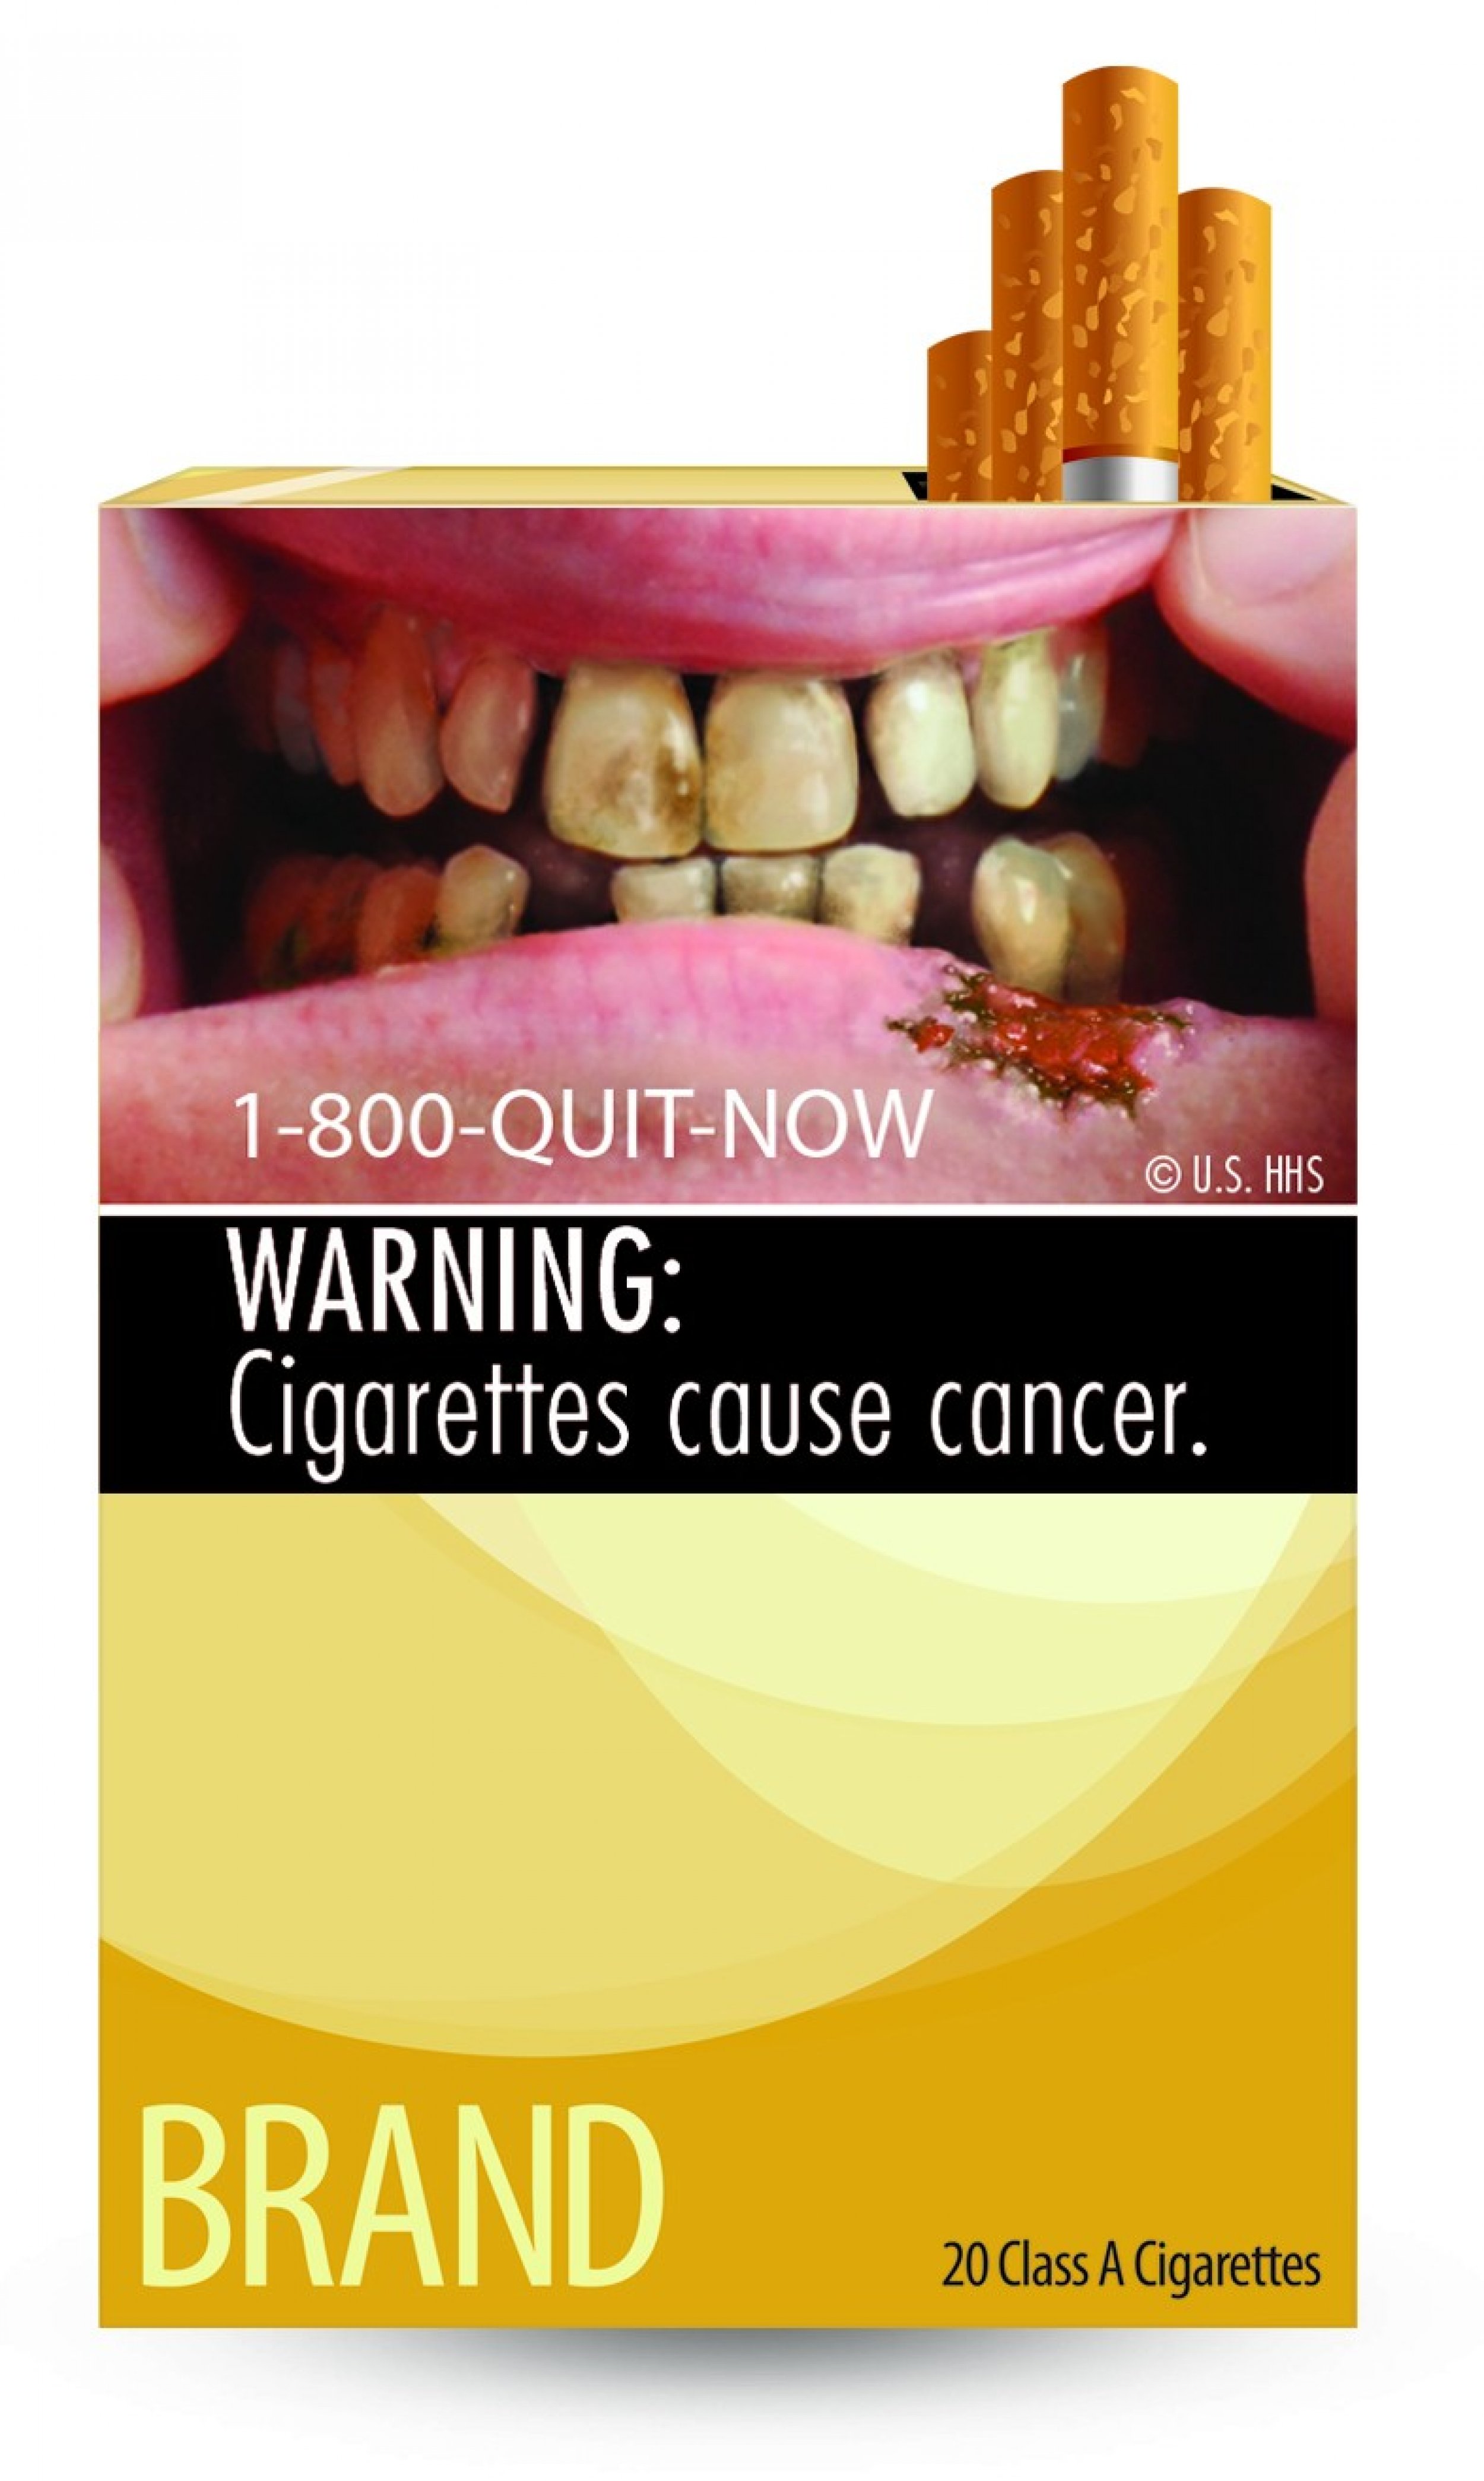 WARNING Cigarettes cause cancer.